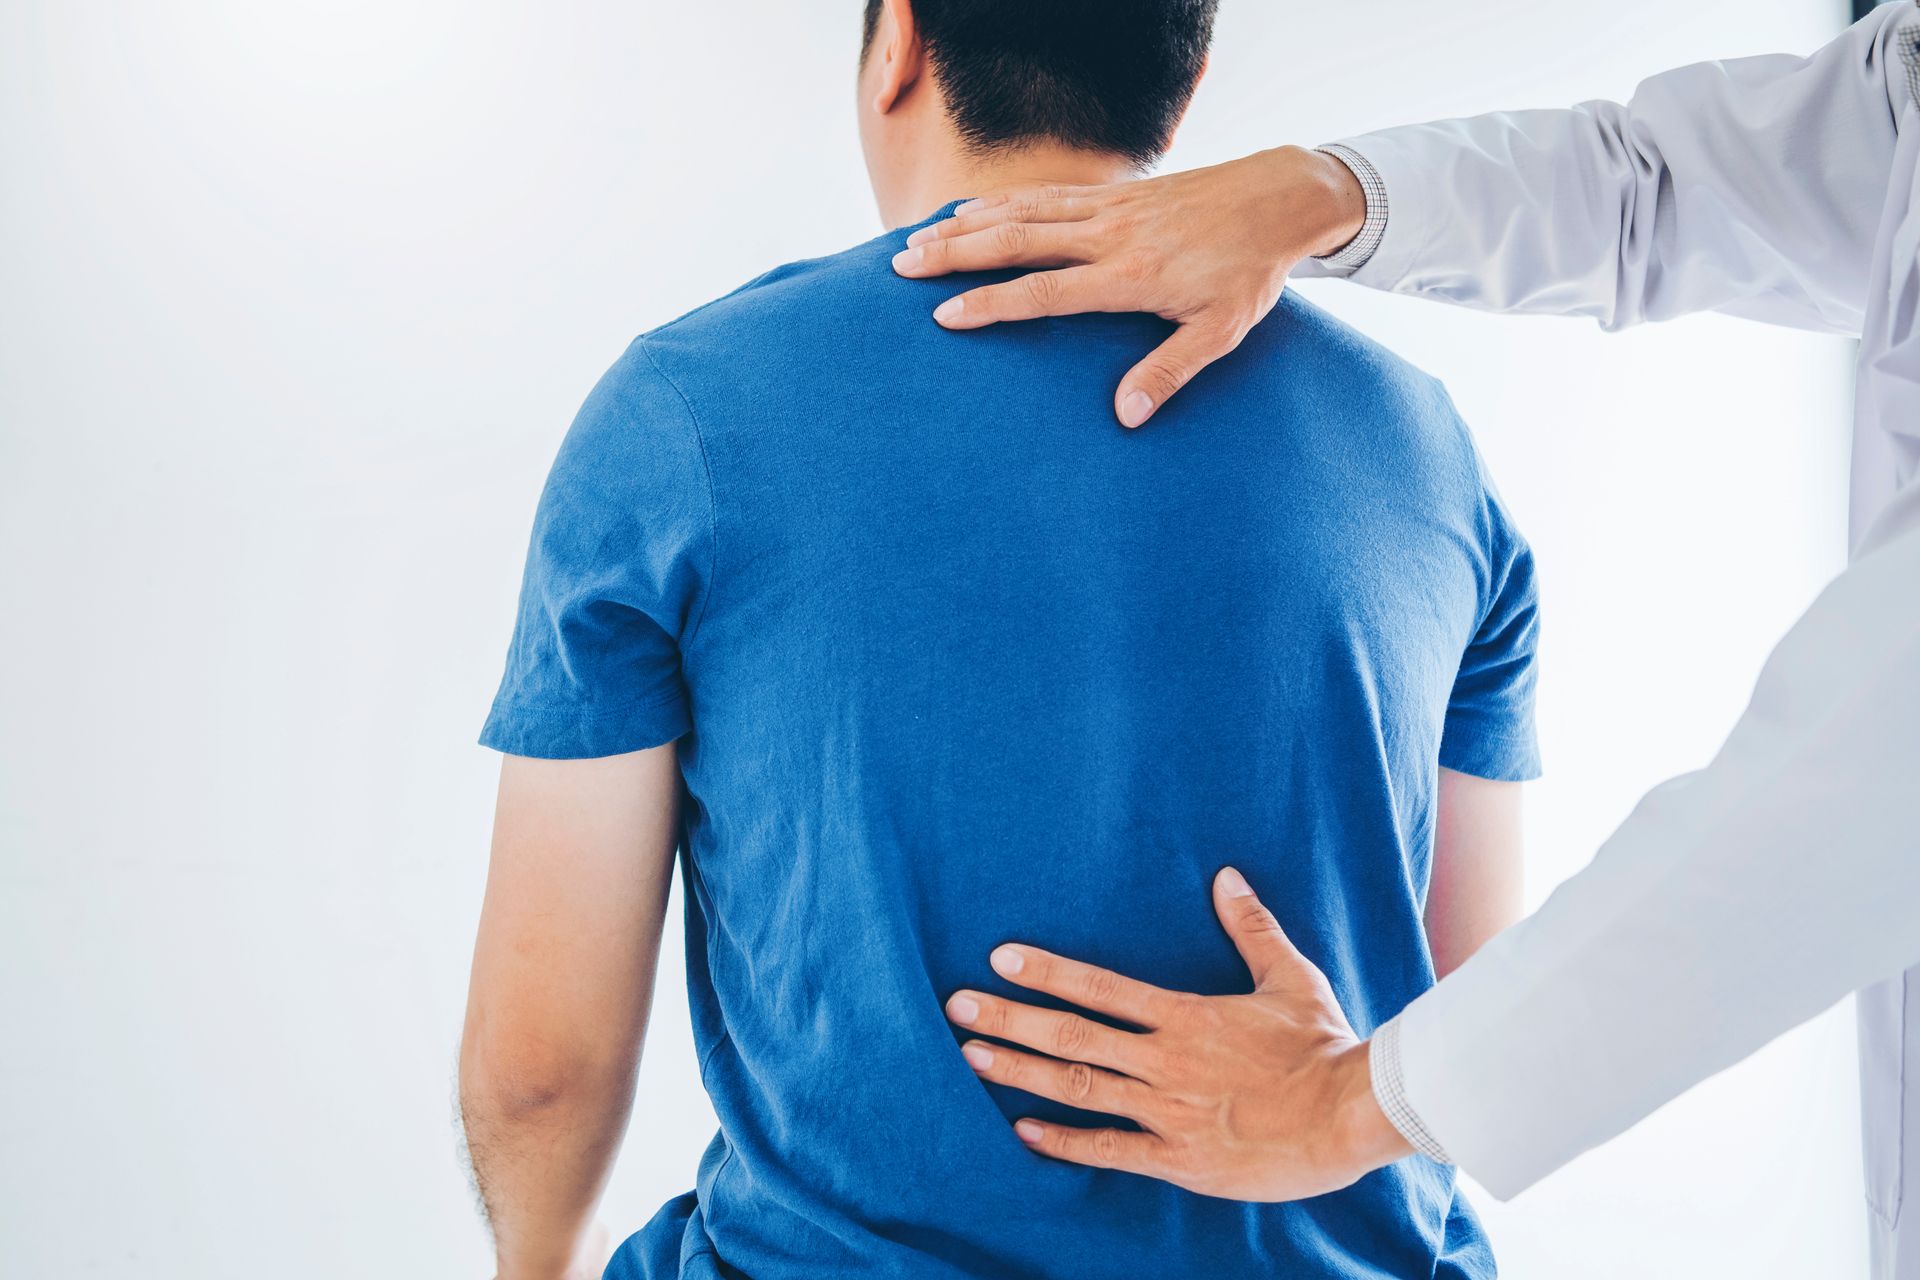 Chiropractor uses his hands to feel his patient's back to help fix lower back pain